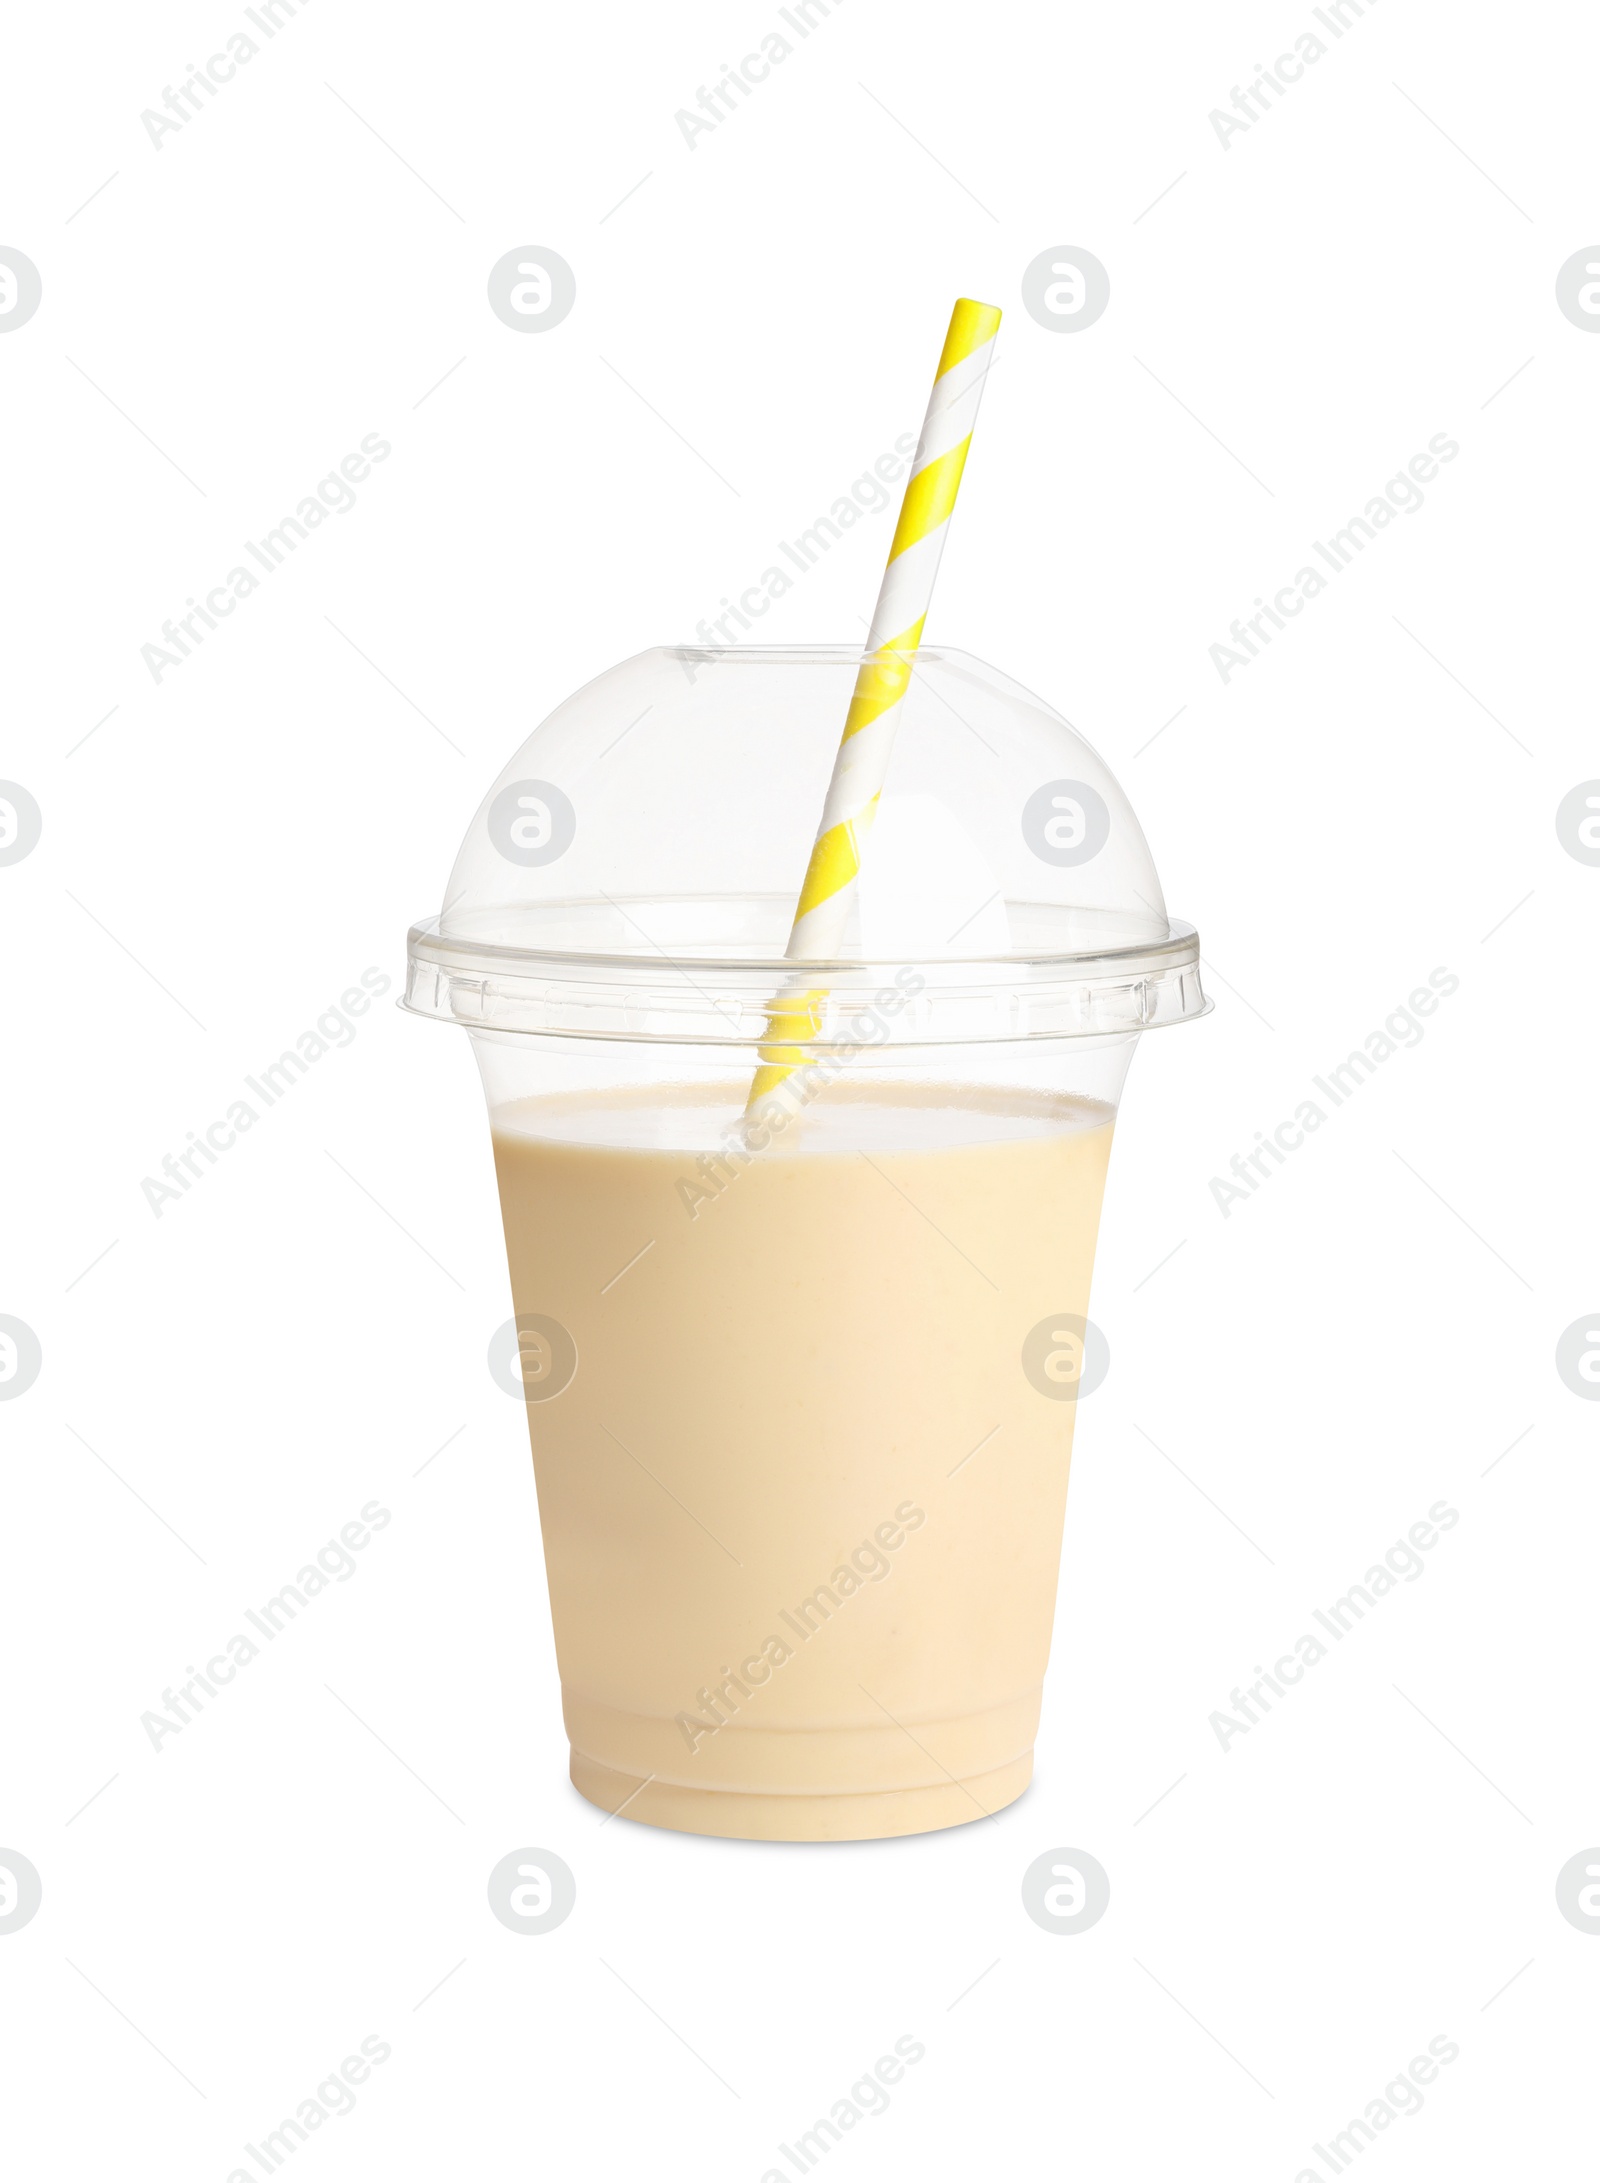 Photo of Plastic cup of tasty banana smoothie on white background